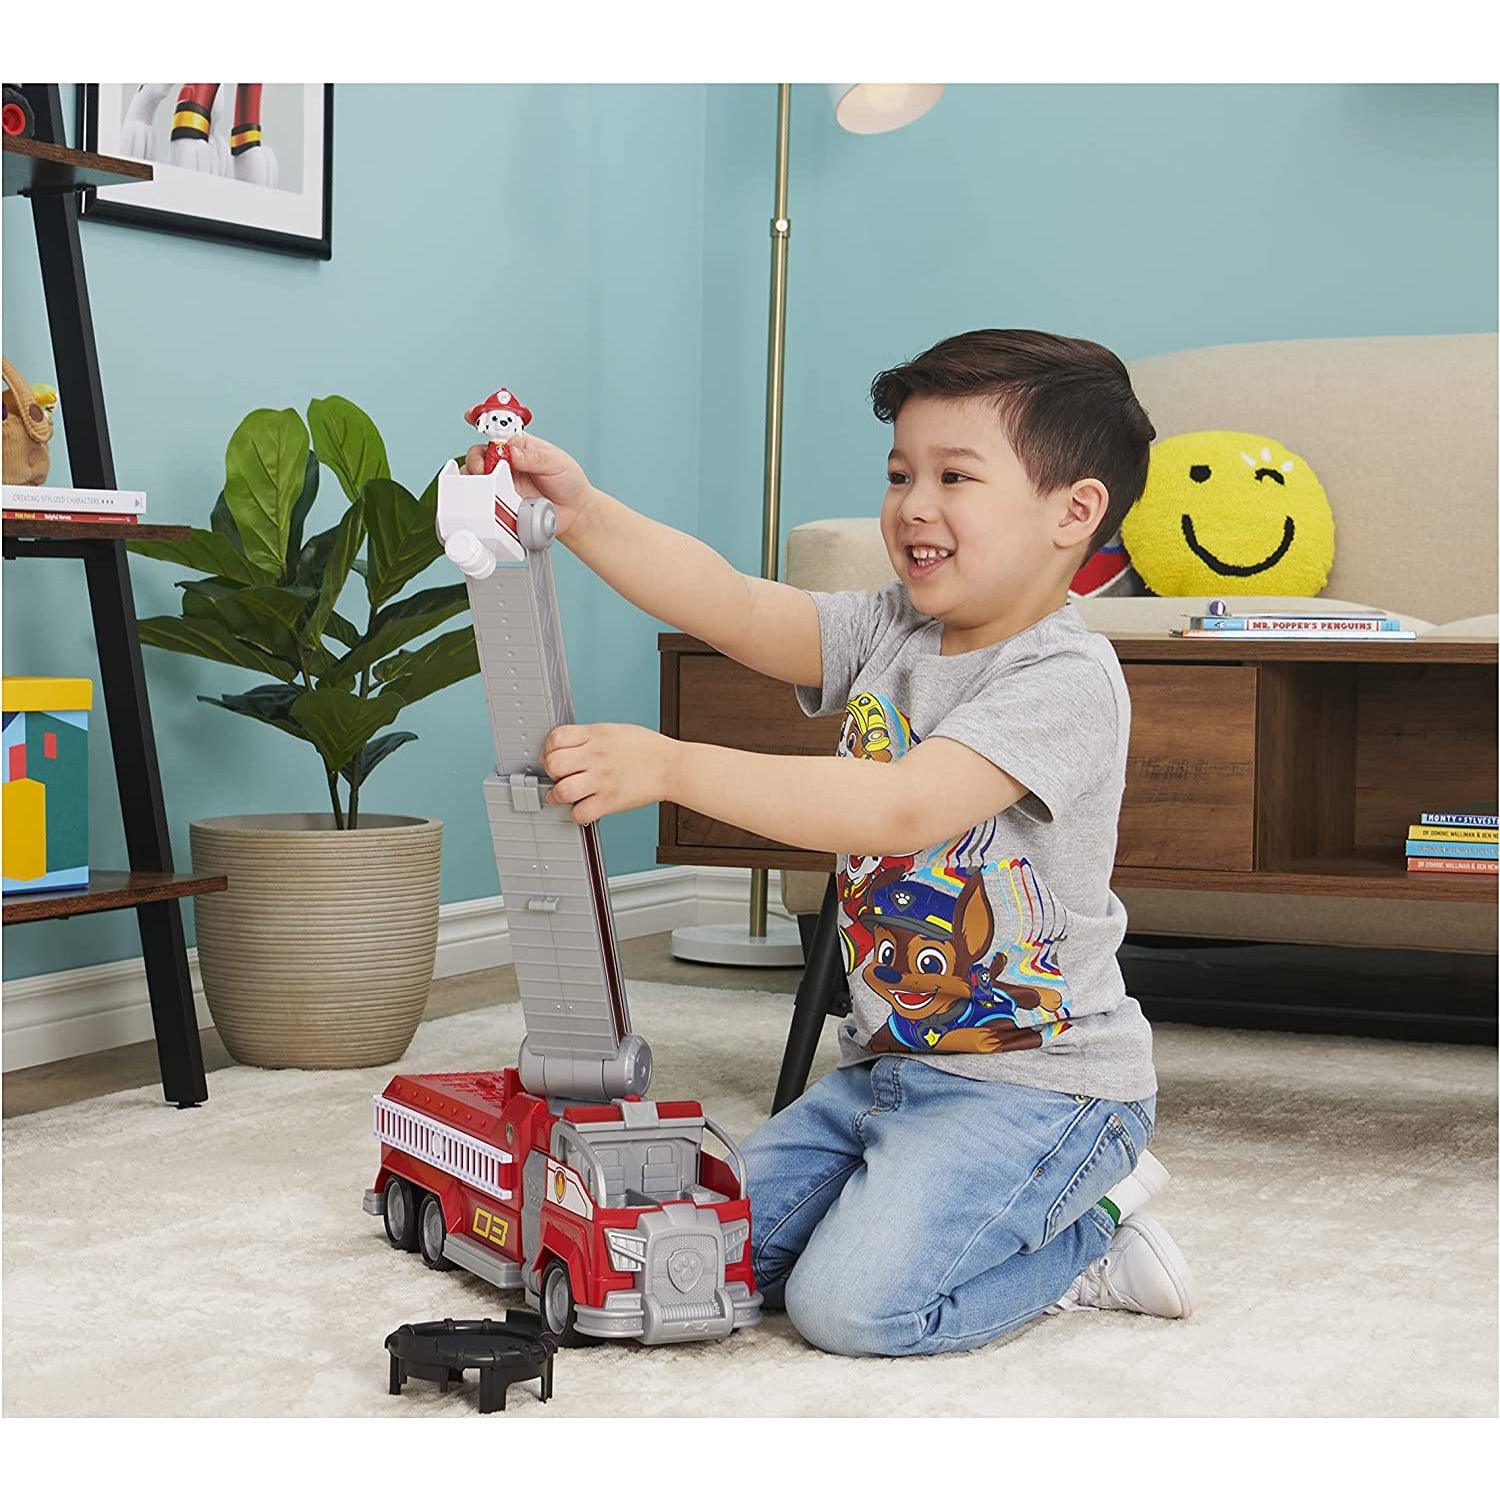 Spin Master Paw Patrol, Marshall’s Transforming Movie City Fire Truck with Extending Ladder, Lights, Sounds and Action Figure - BumbleToys - 5-7 Years, Arabic Triangle Trading, Boys, Paw Patrol, Vehicles & Play Sets